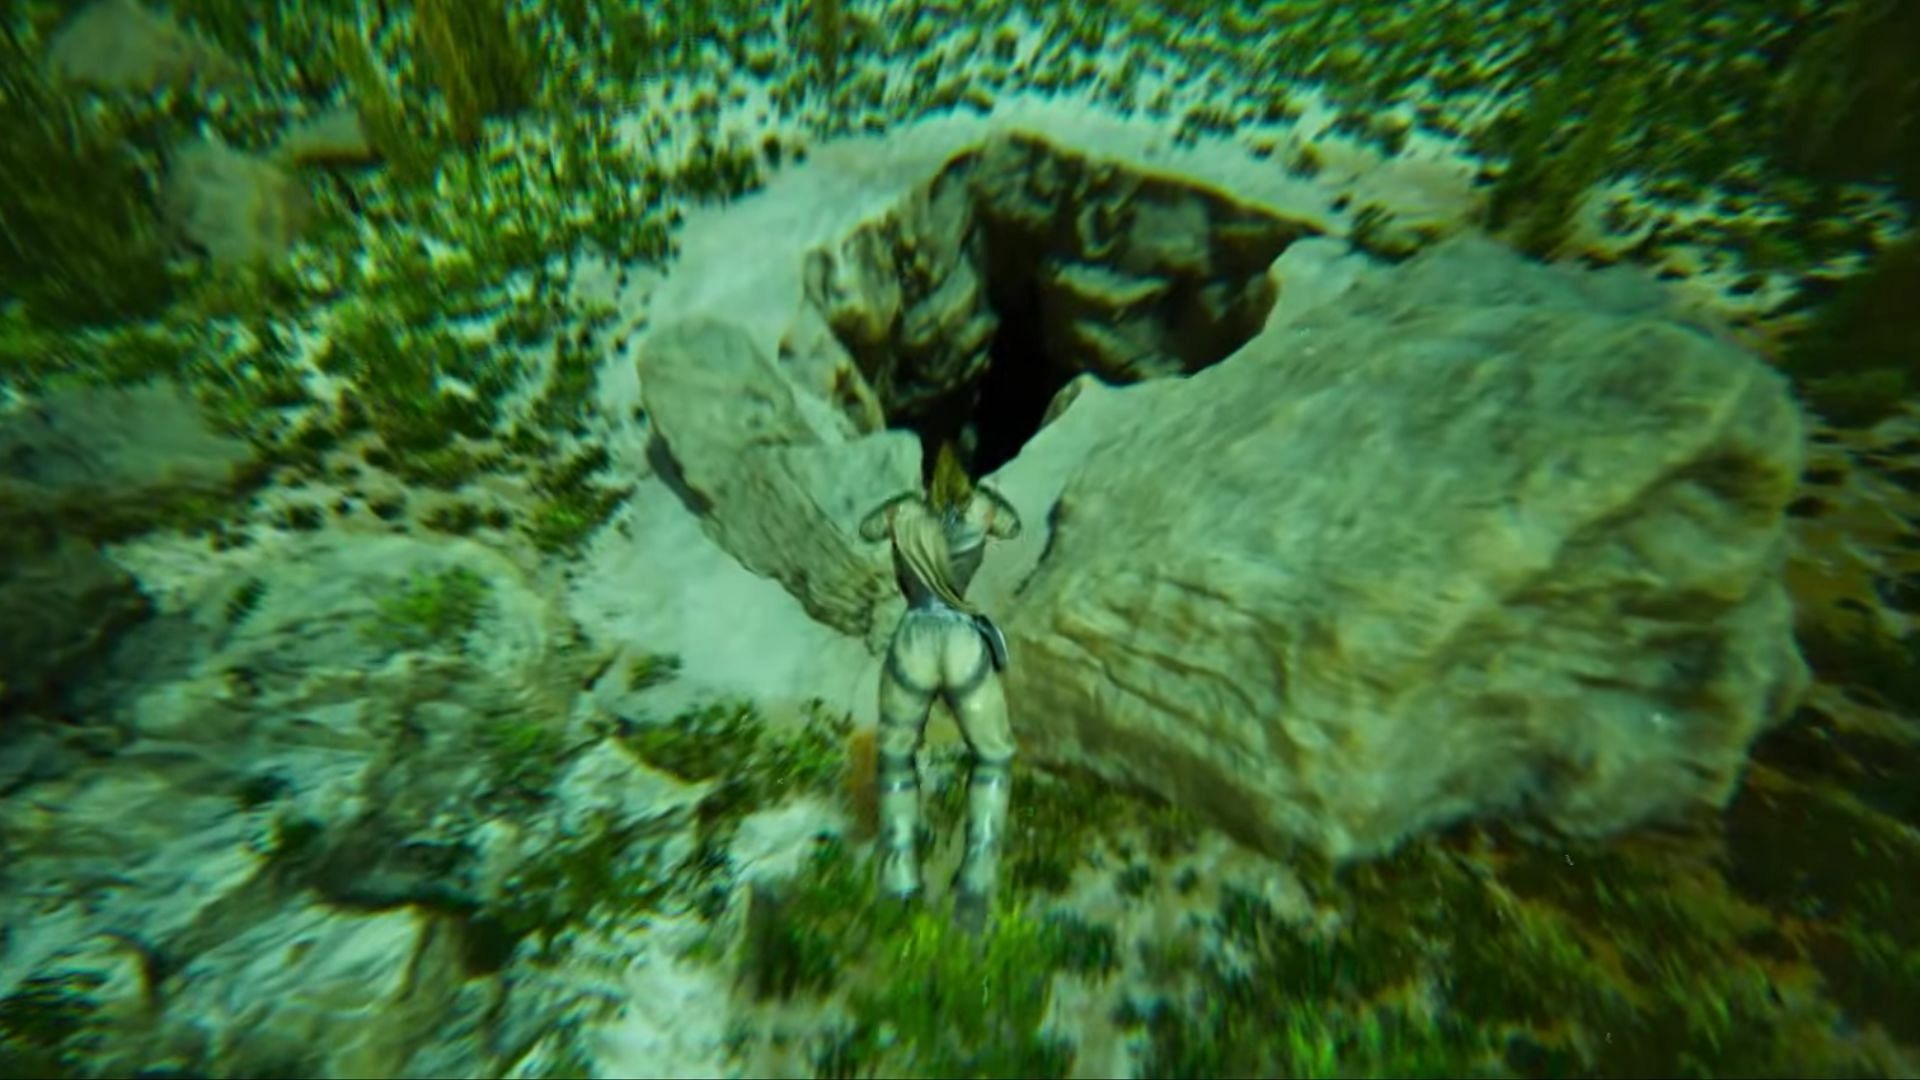 Entrance to the Underground World Biome in Ark Survival Ascended (Image via Studio Wildcard)